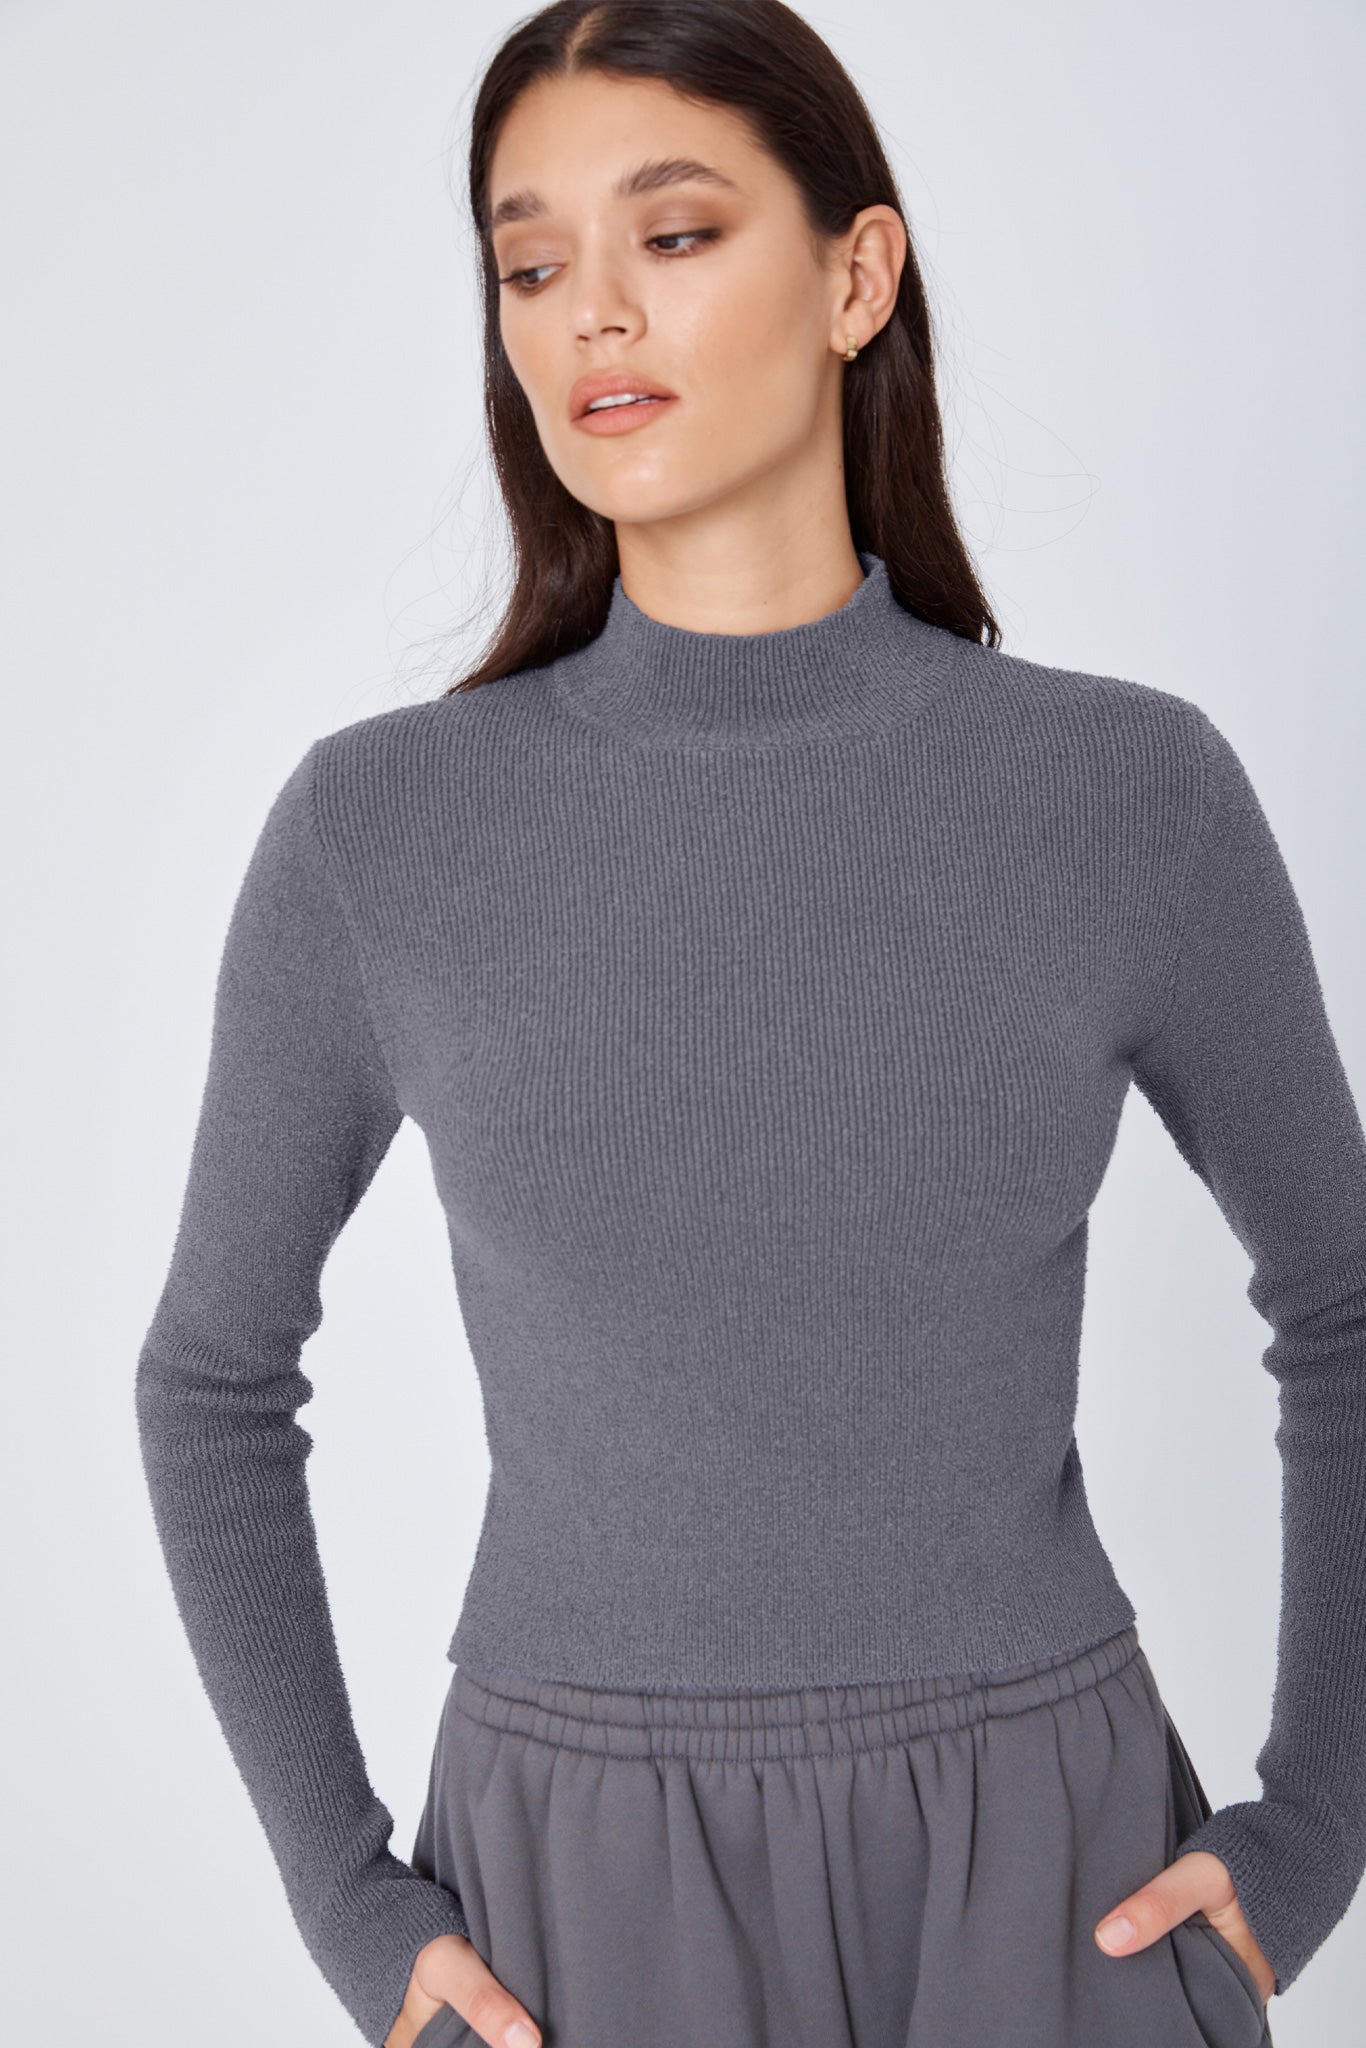 The Long Sleeve Top